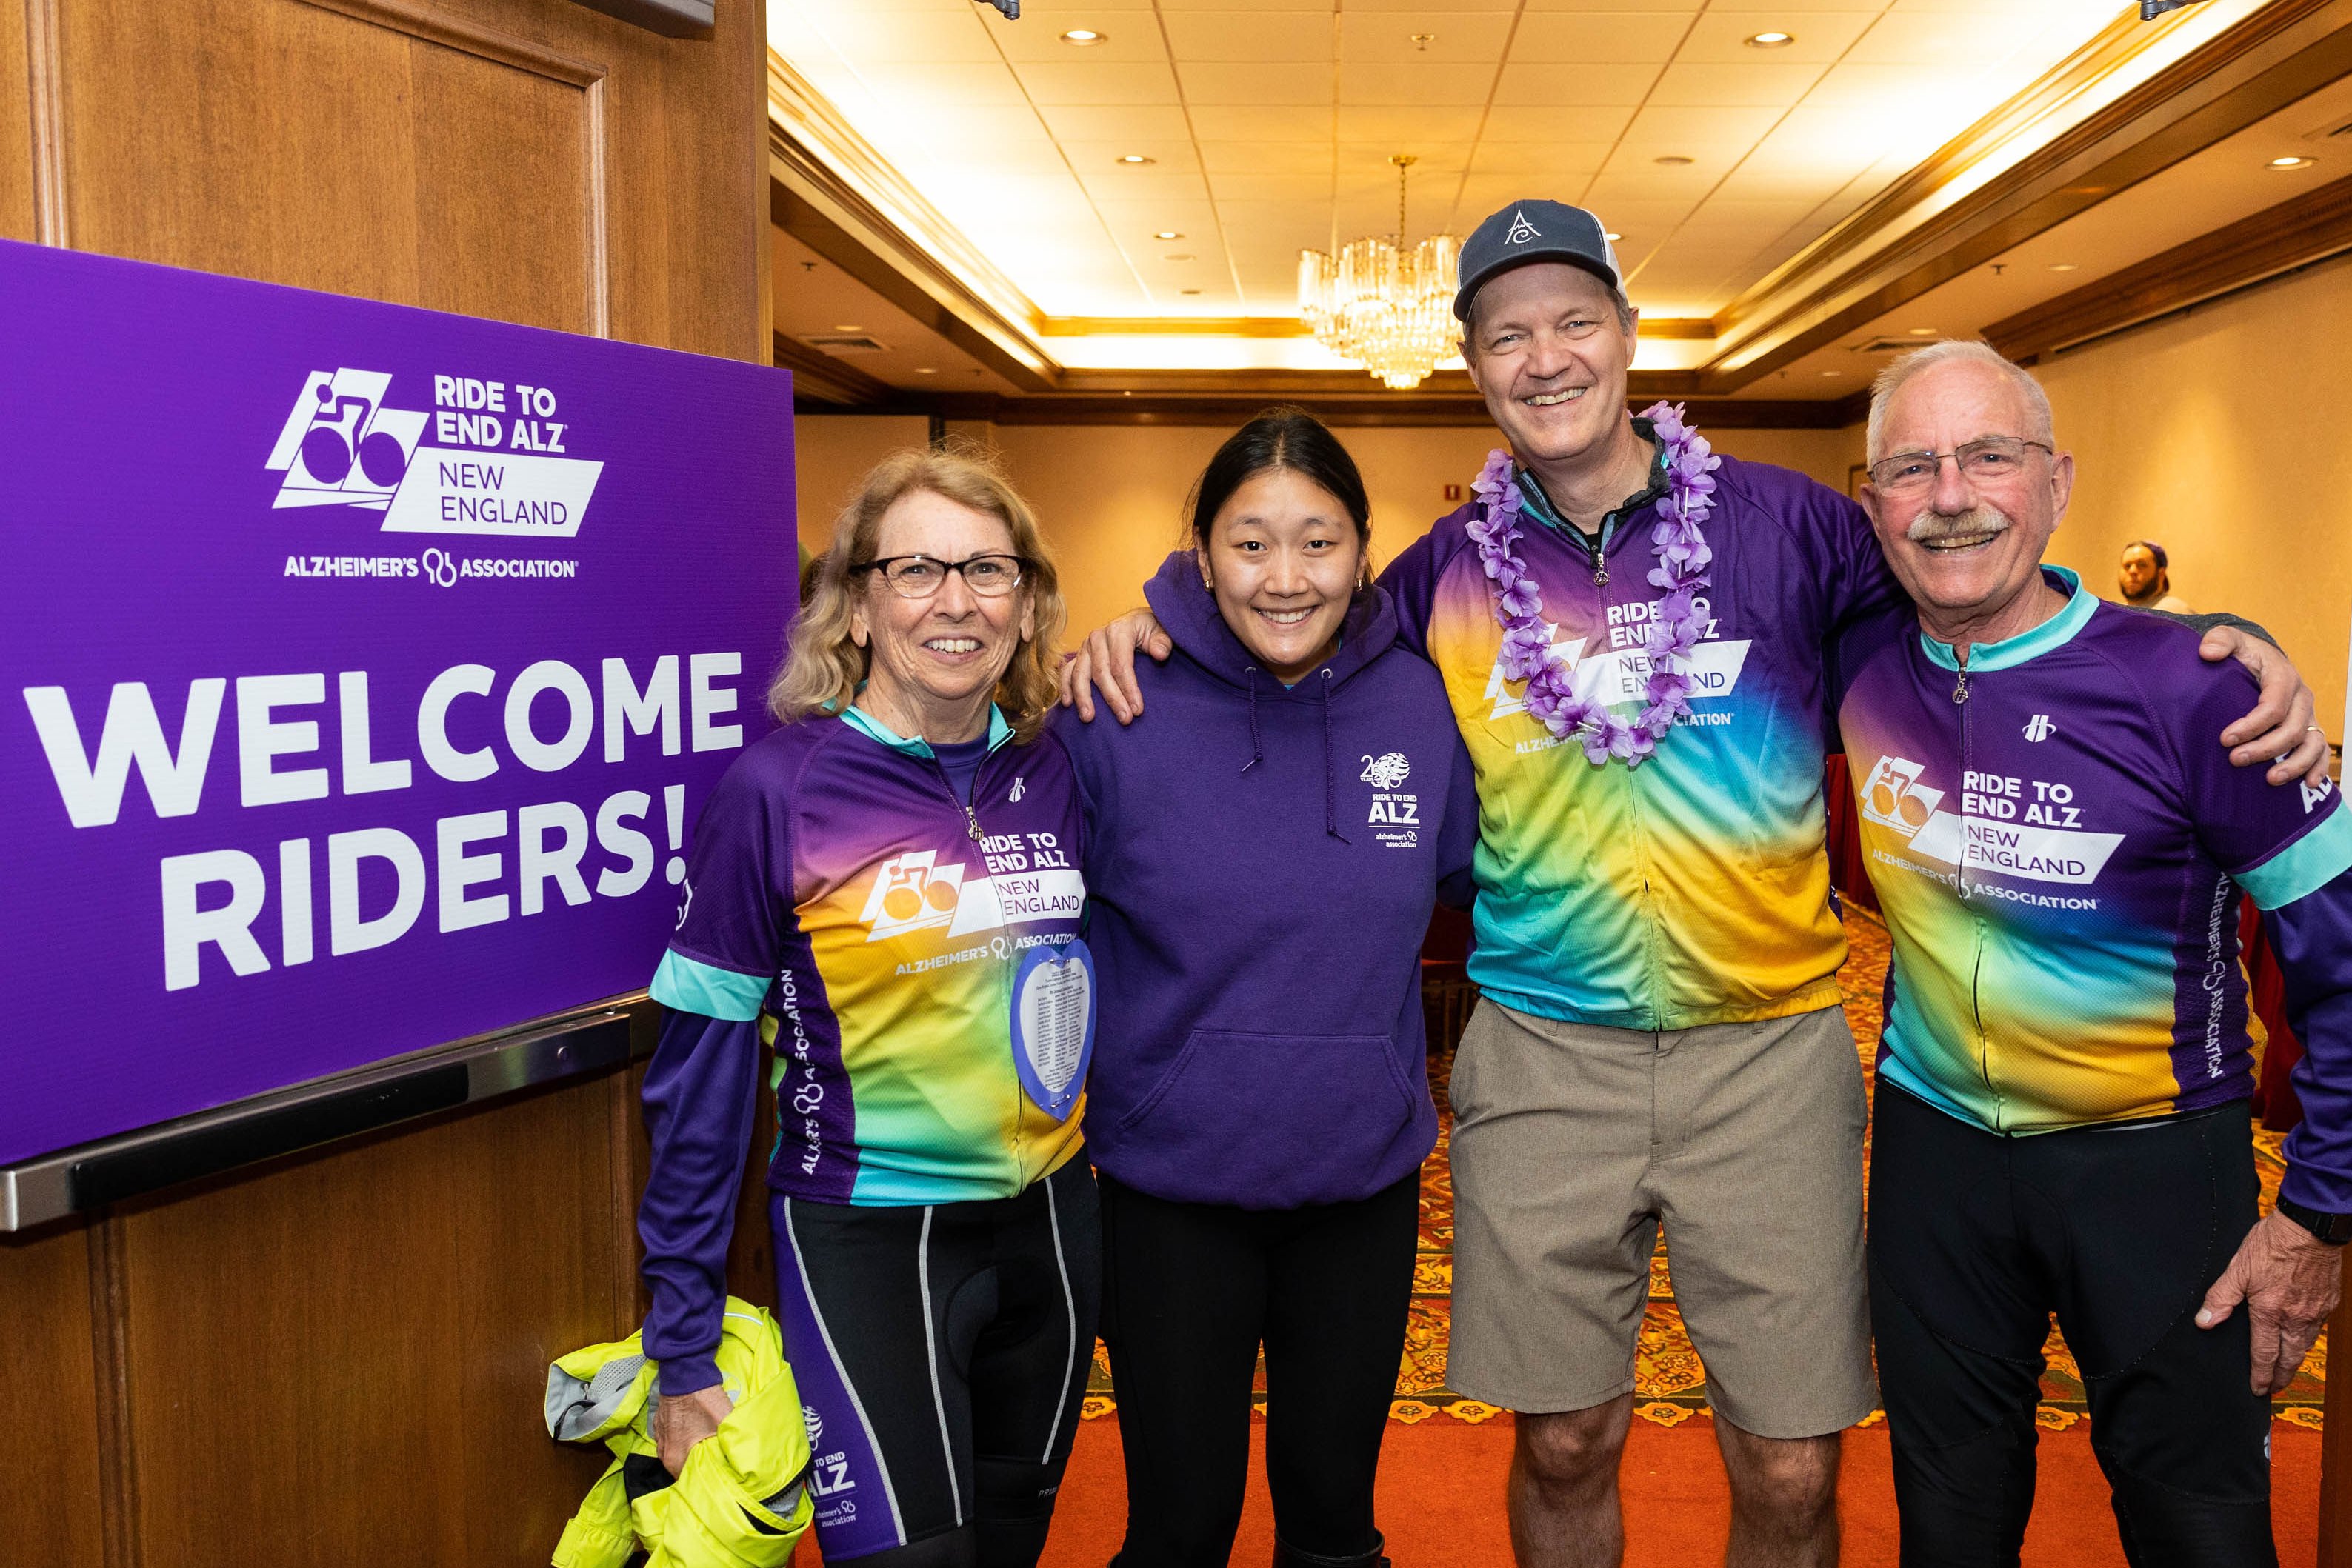 Ride to End ALZ New England cyclist